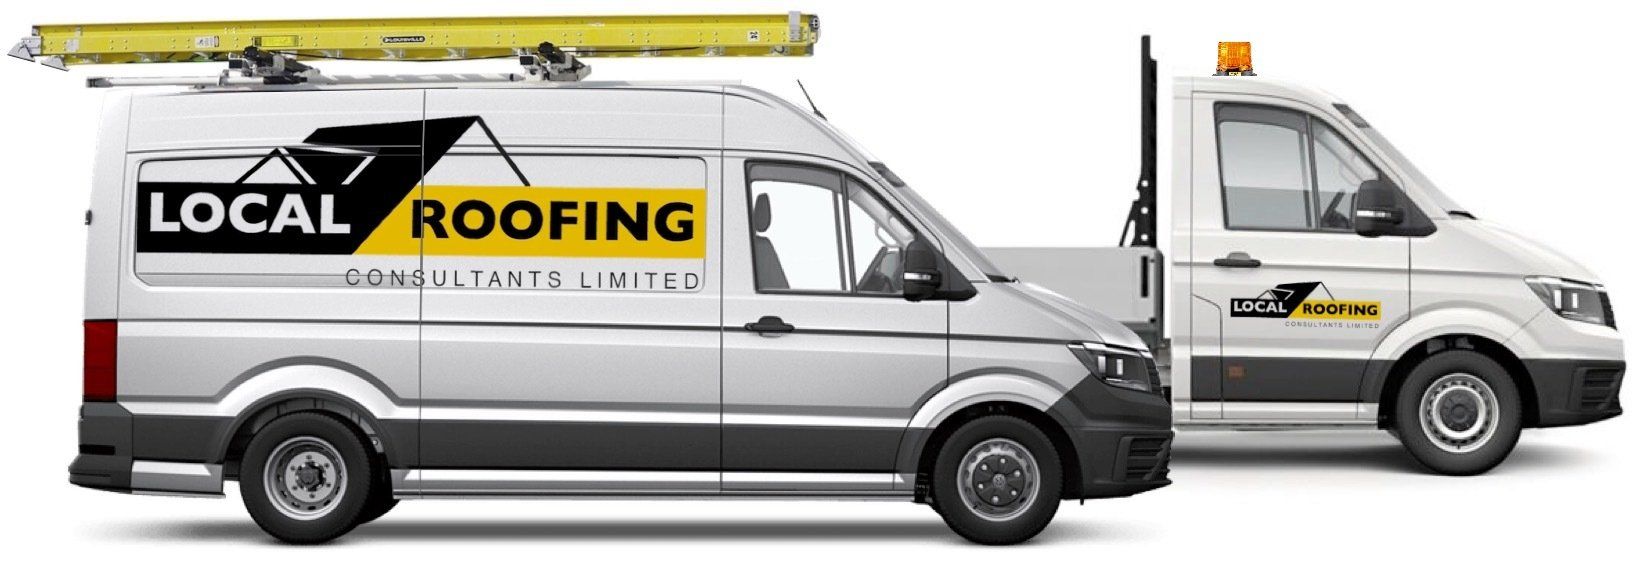 Local Roofing Consultants Limited work in Cricklewood and throughout the London area